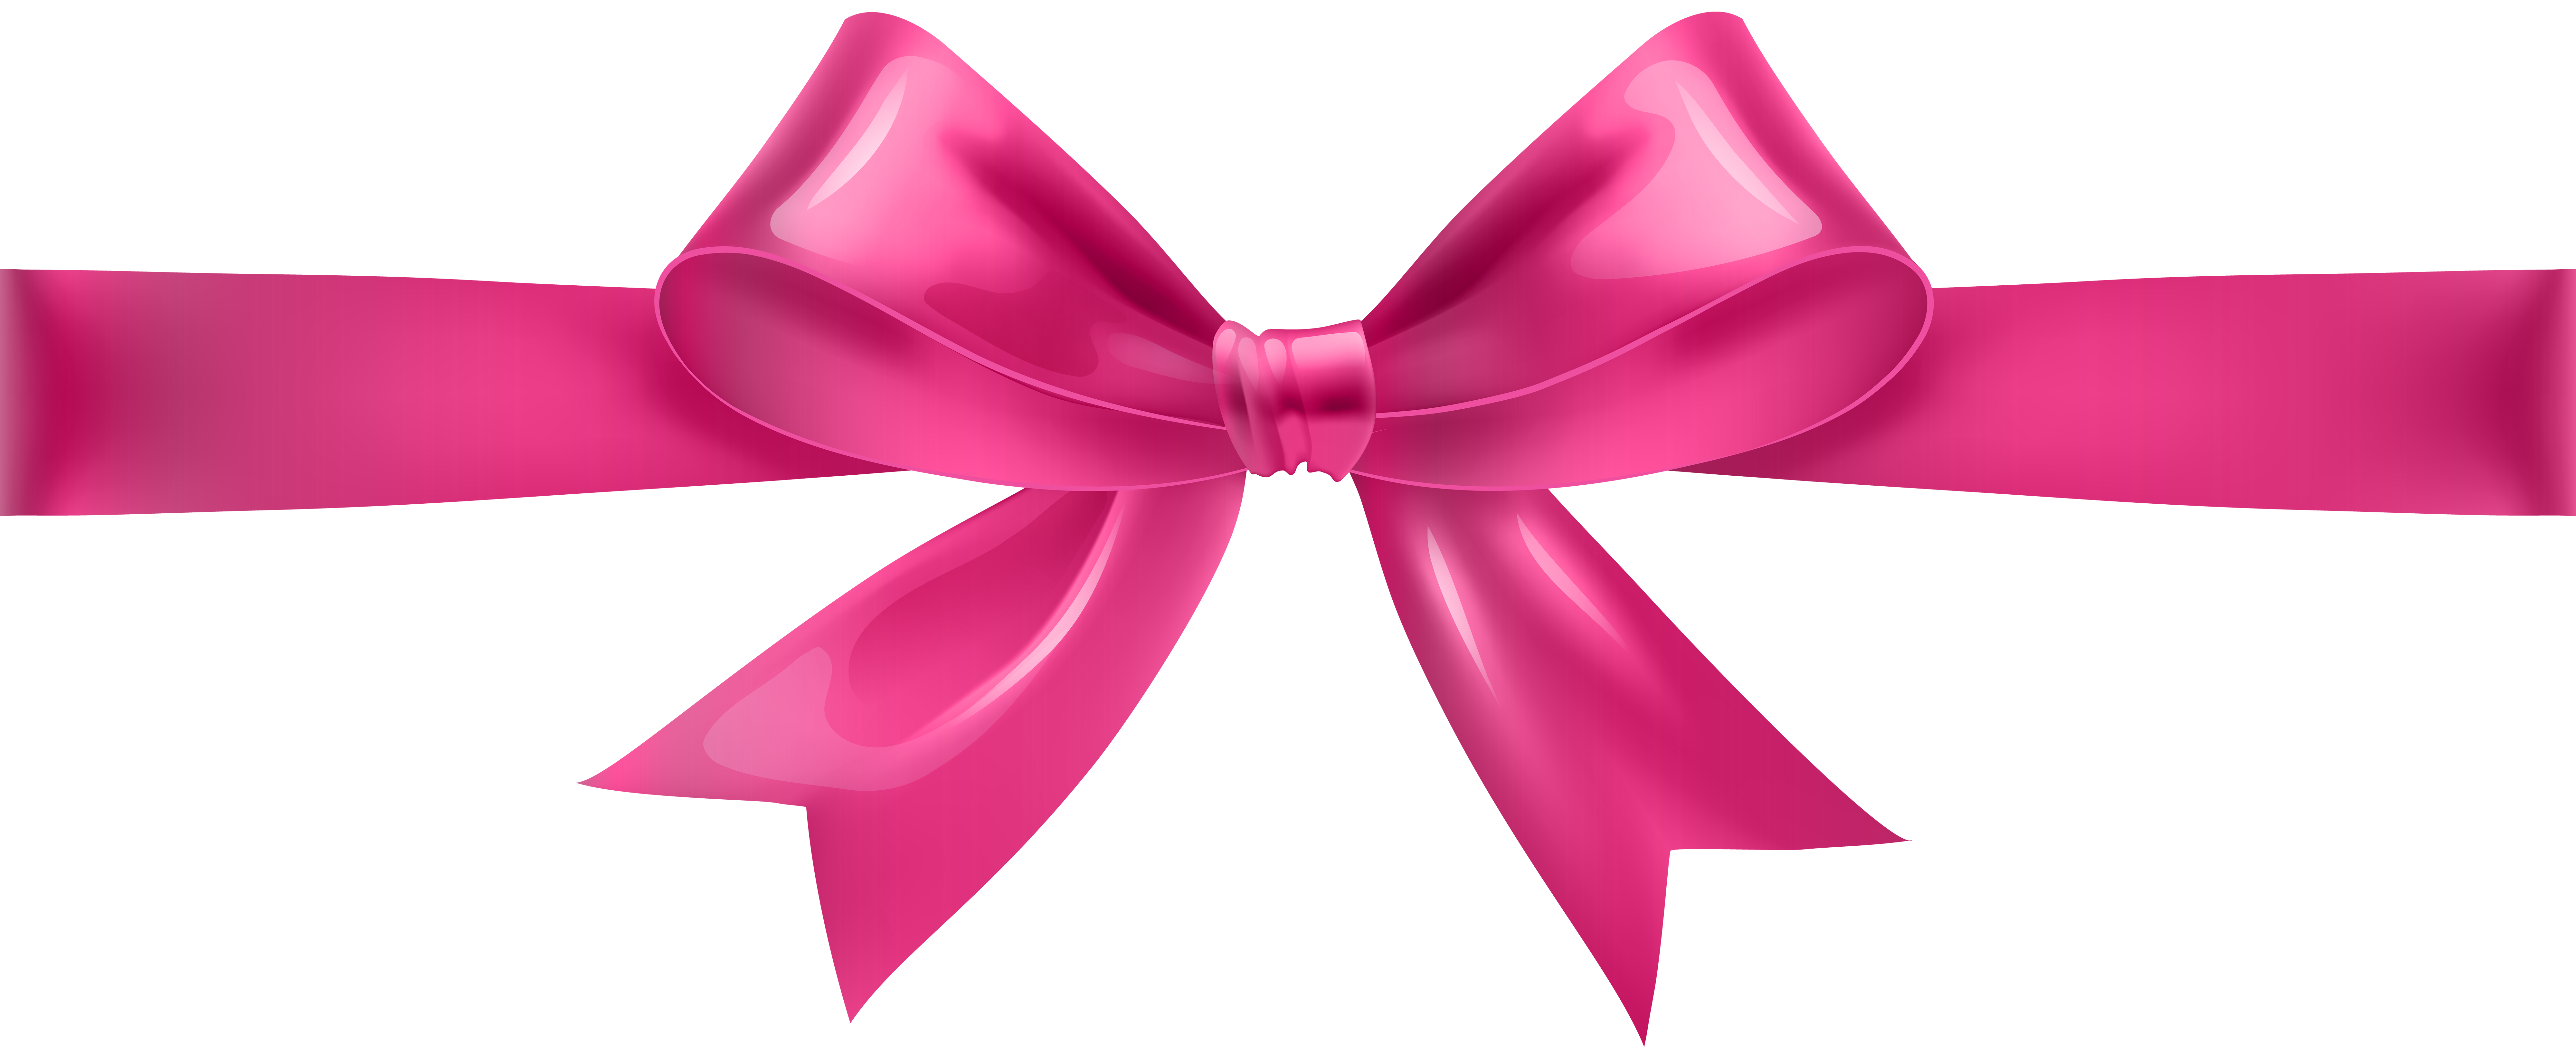 Pink Ribbon PNG Clipart Picture​, Gallery Yopriceville - High-Quality  Images and Transparent PNG Free Clipart